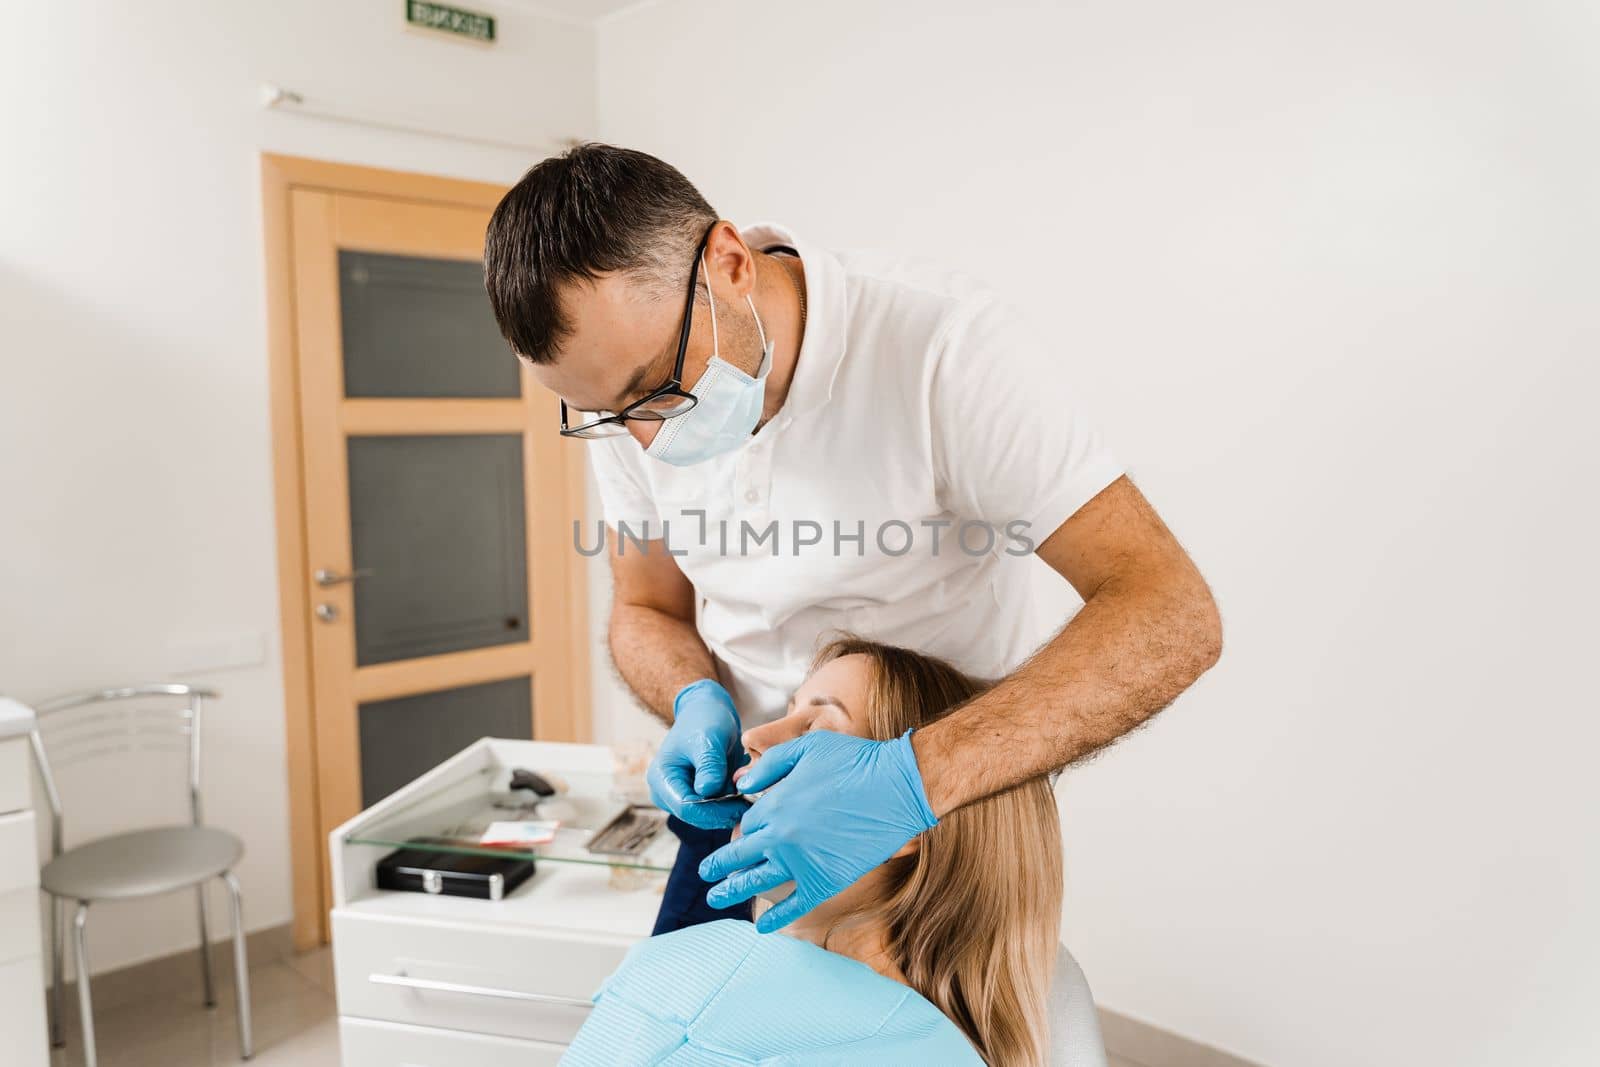 Procedure of creating dental prostheses, crowns and aligners. Doctor inserts impression tray and making cast of teeth to patient in dentistry before dental implantation.